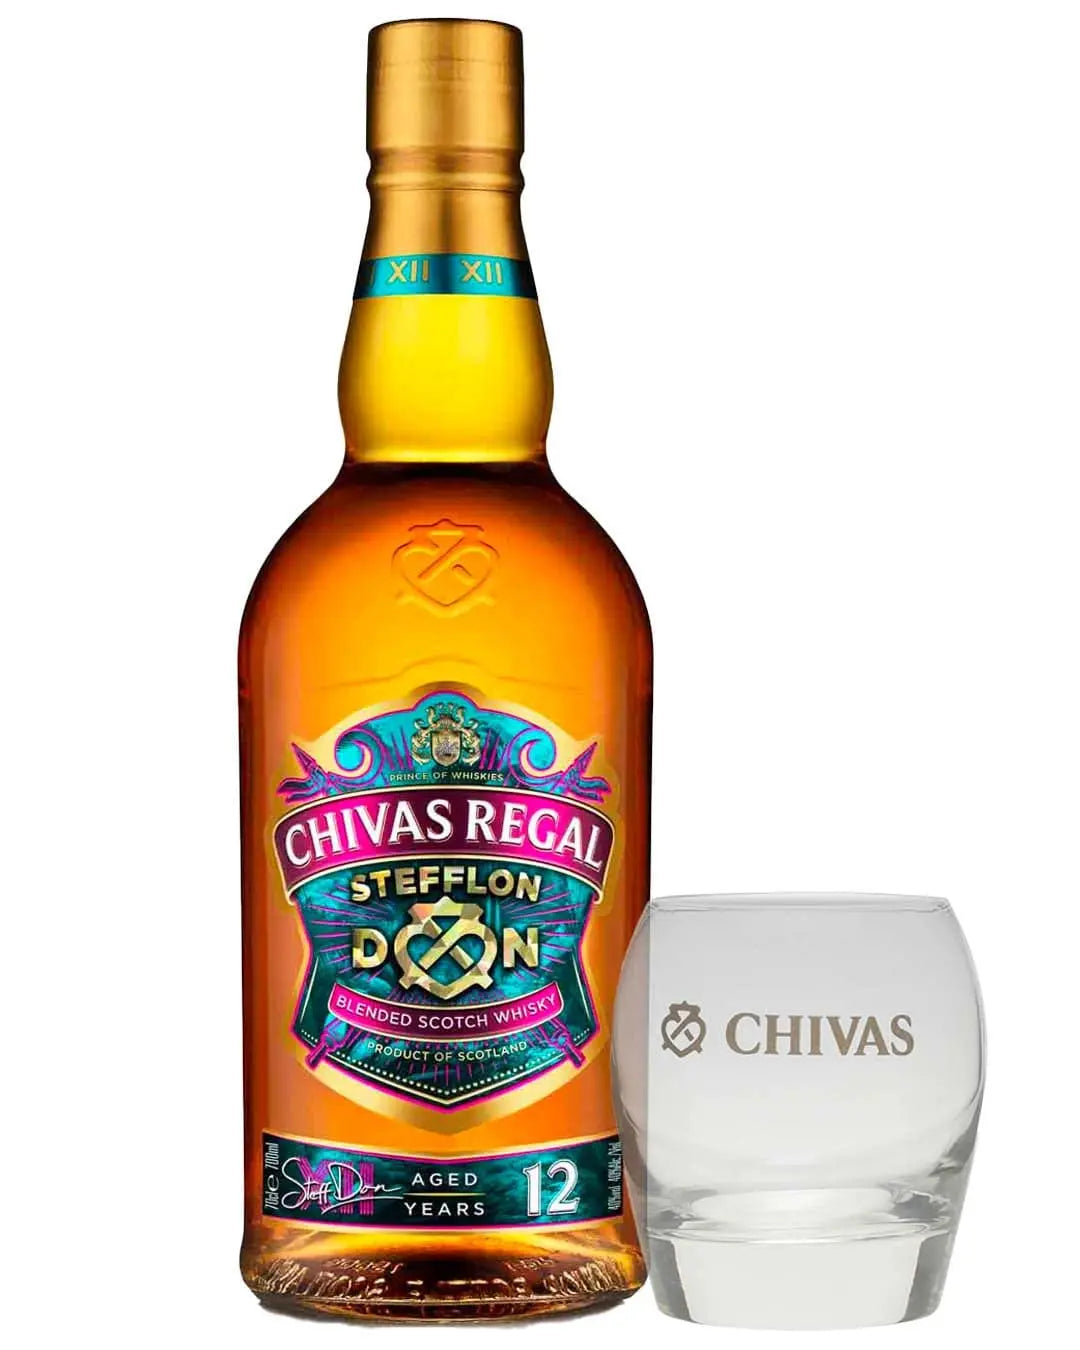 Chivas Regal x Stefflon Don 12 Year Old Scotch Whisky with Free Glass, 70 cl Whisky